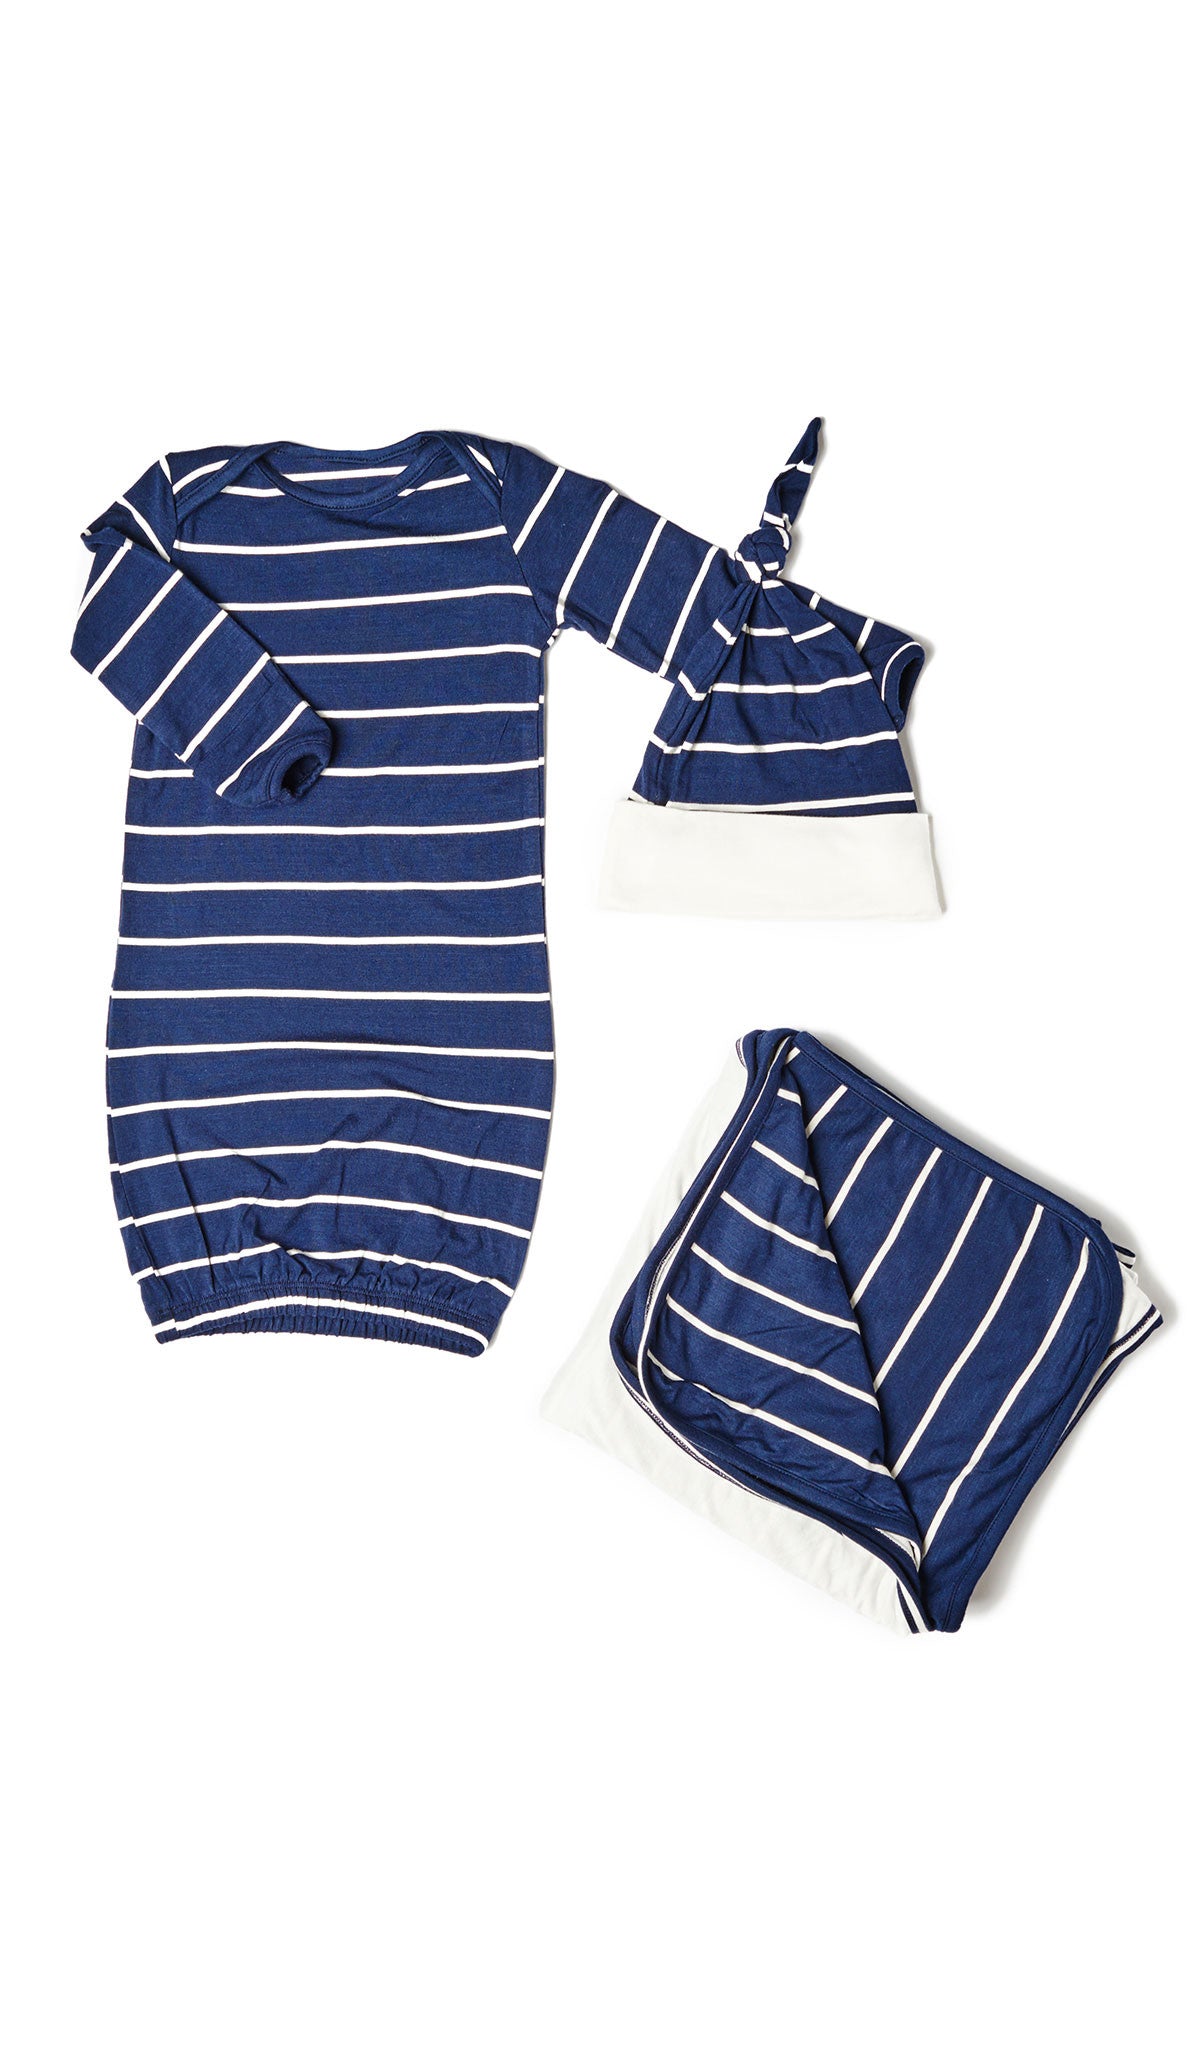 Baby's Welcome Home 3 Piece Set - Navy